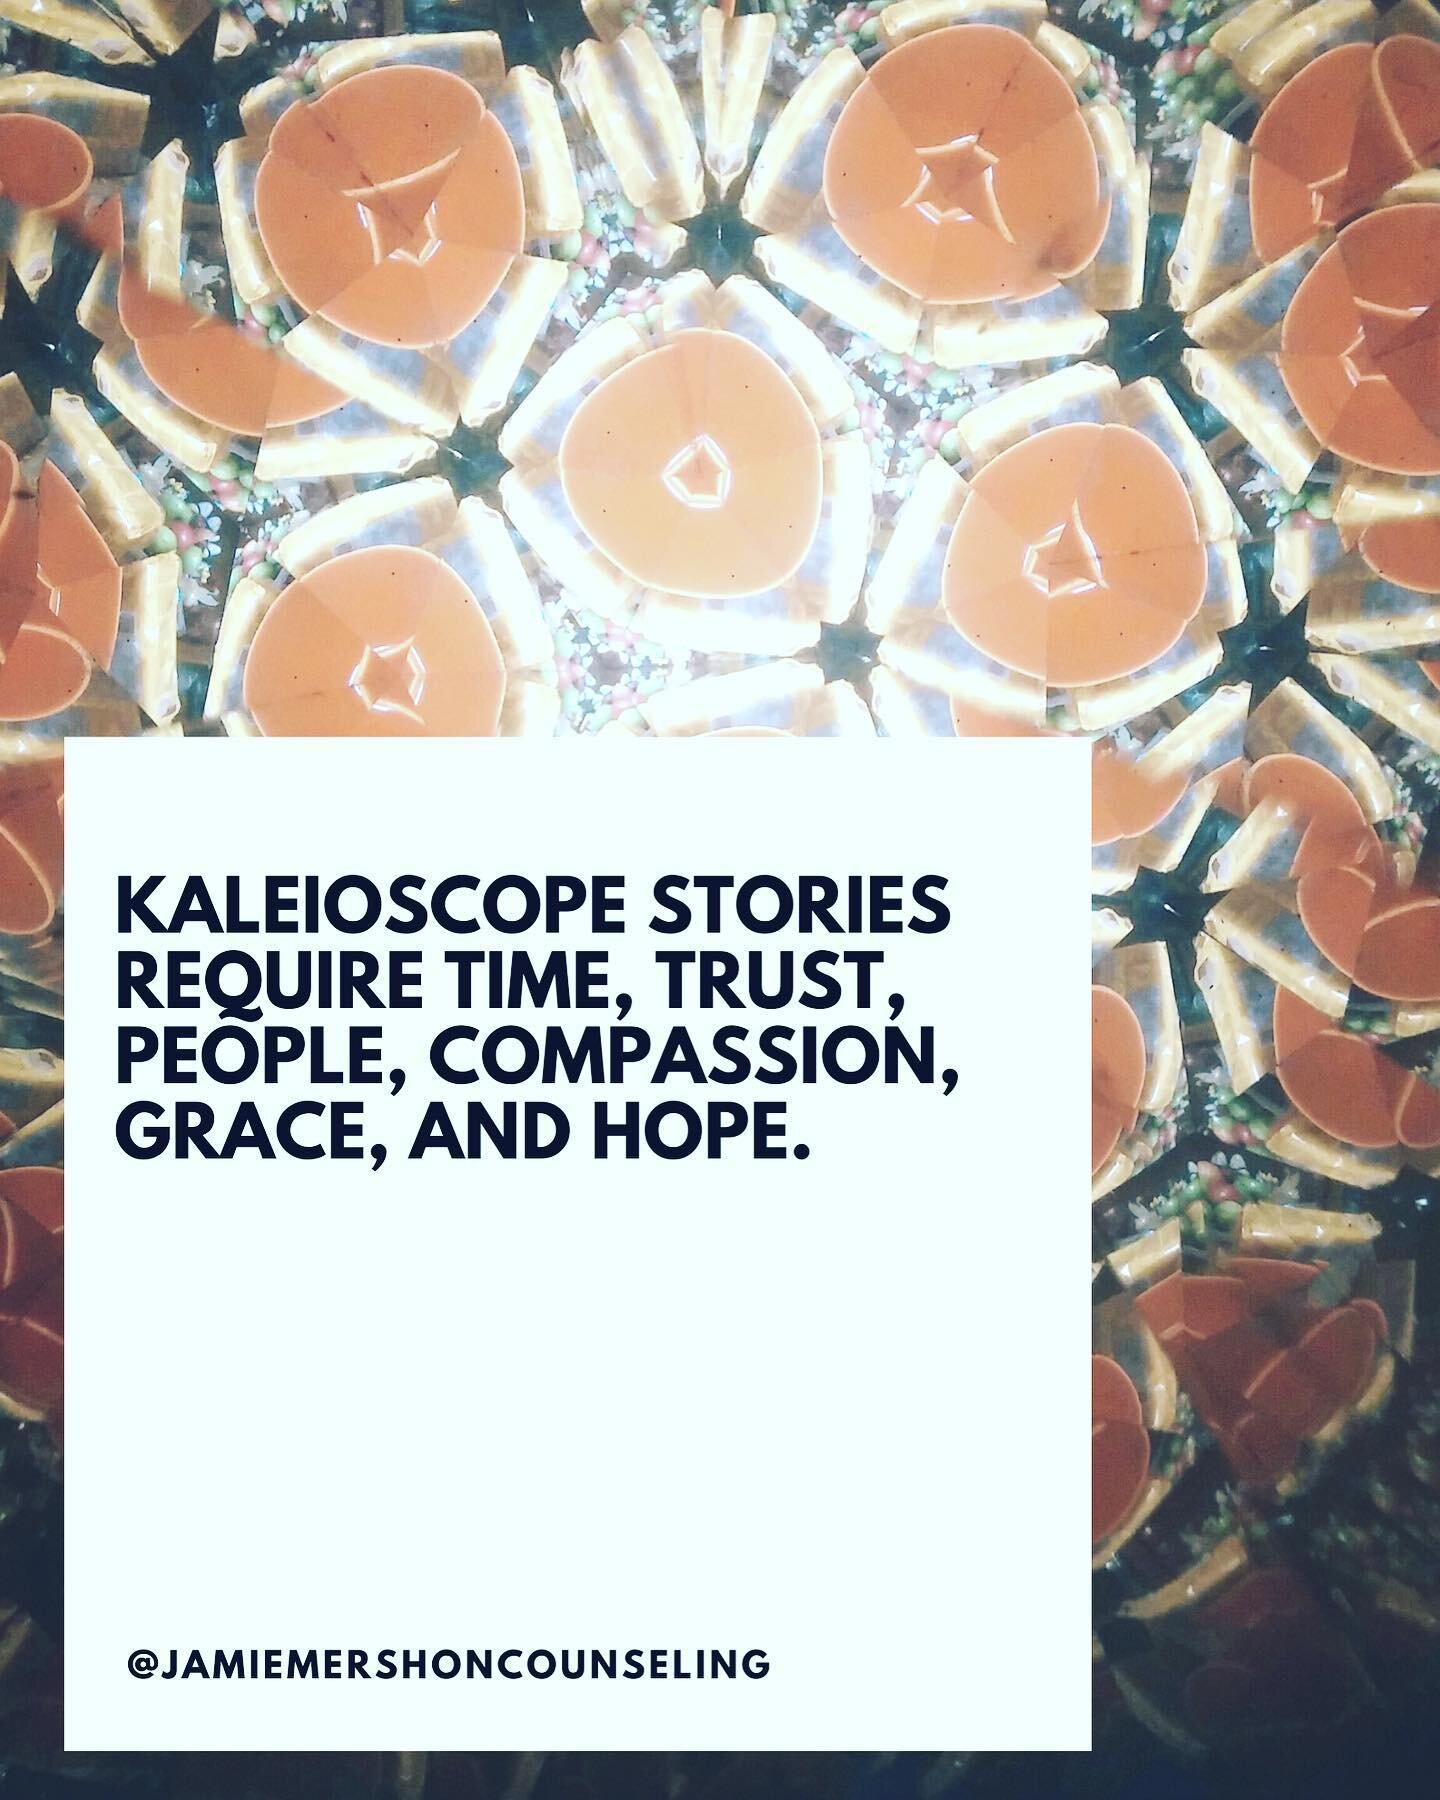 ****I&rsquo;m so glad I can spell🤣...too late to change the misspelling on my main post pic but such is life🙈🤓 mistakes keep us humble and perfectionism is exhausting 🤣☺️****

Kaleidoscope stories are something we will all have in our life time. 